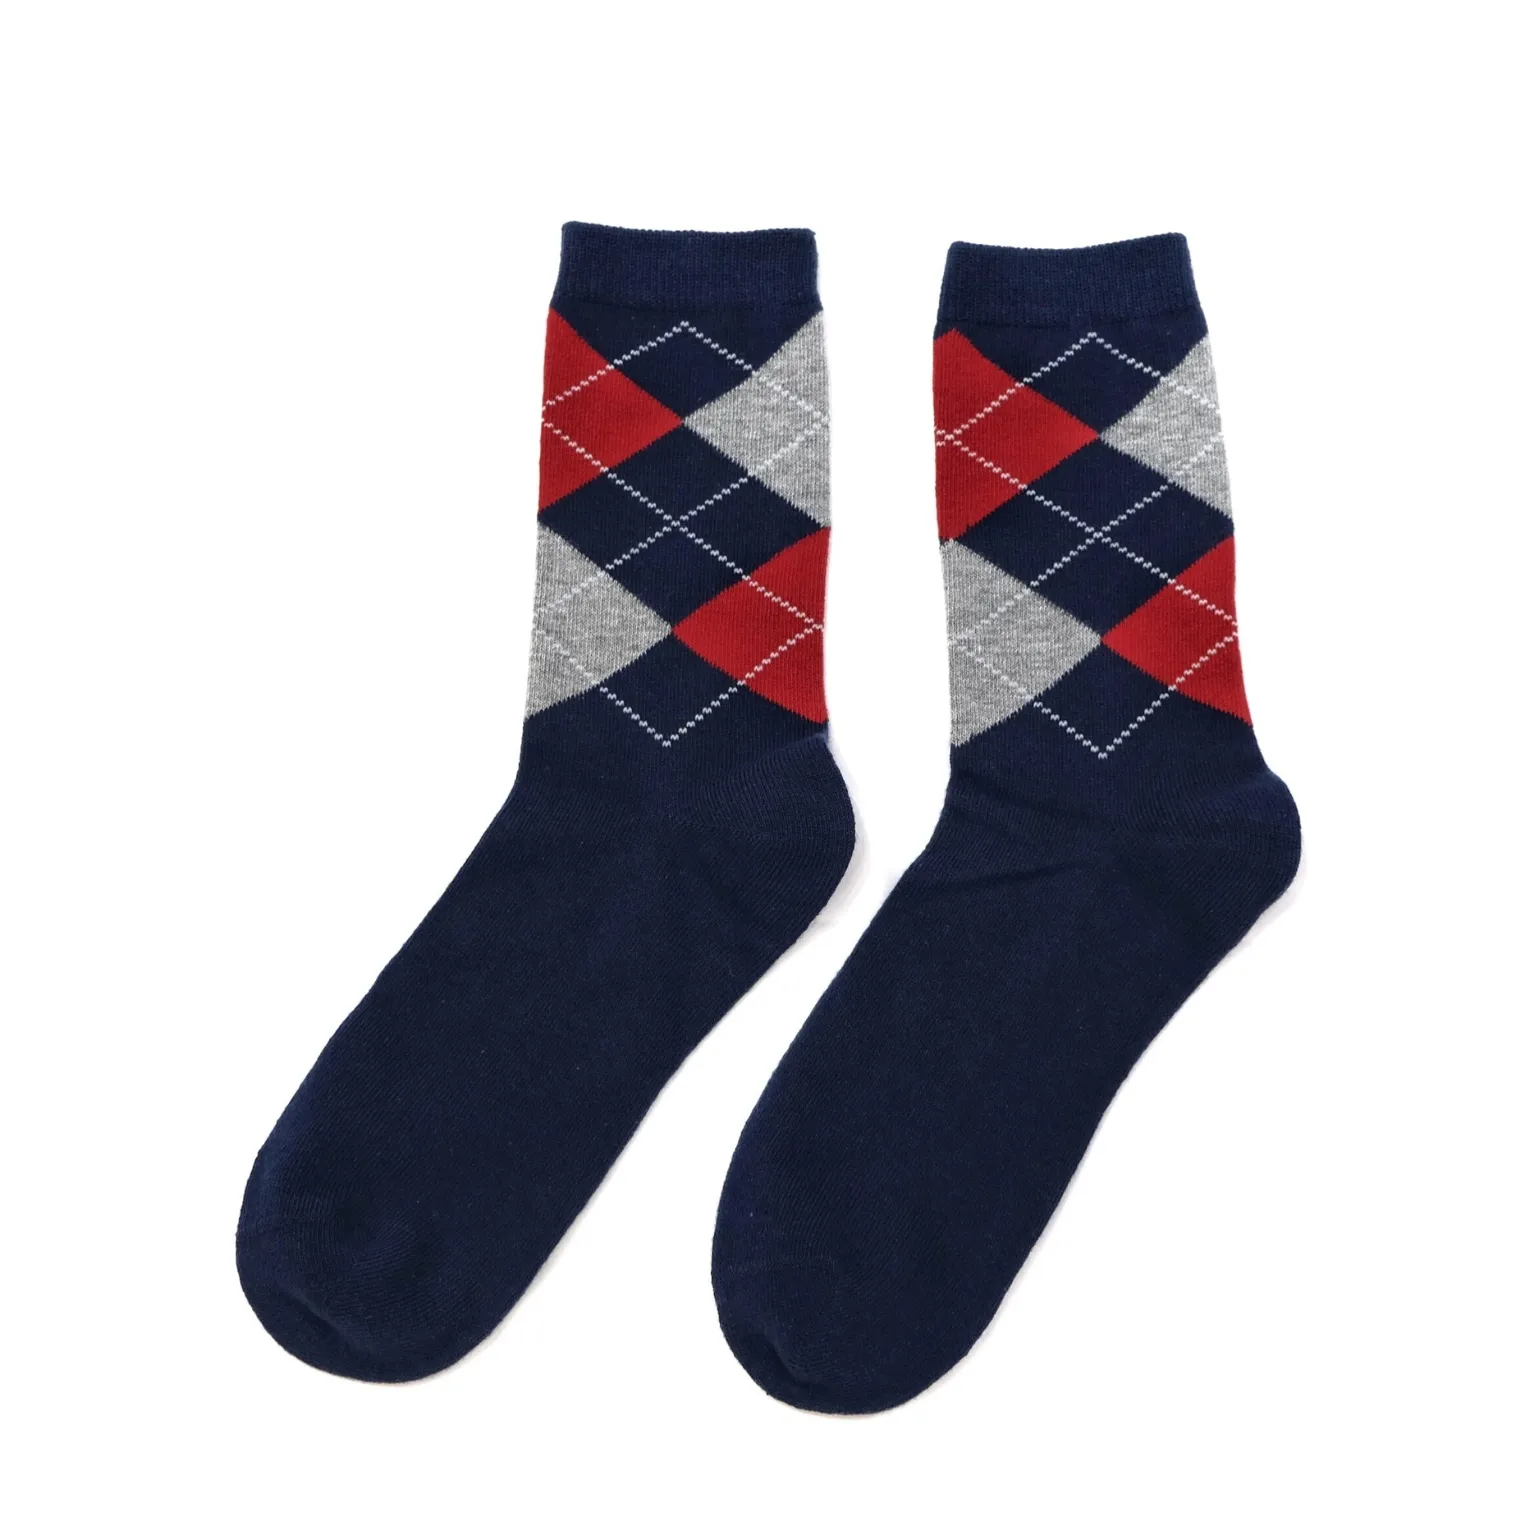 Dress Socks manufacturing with trendy design